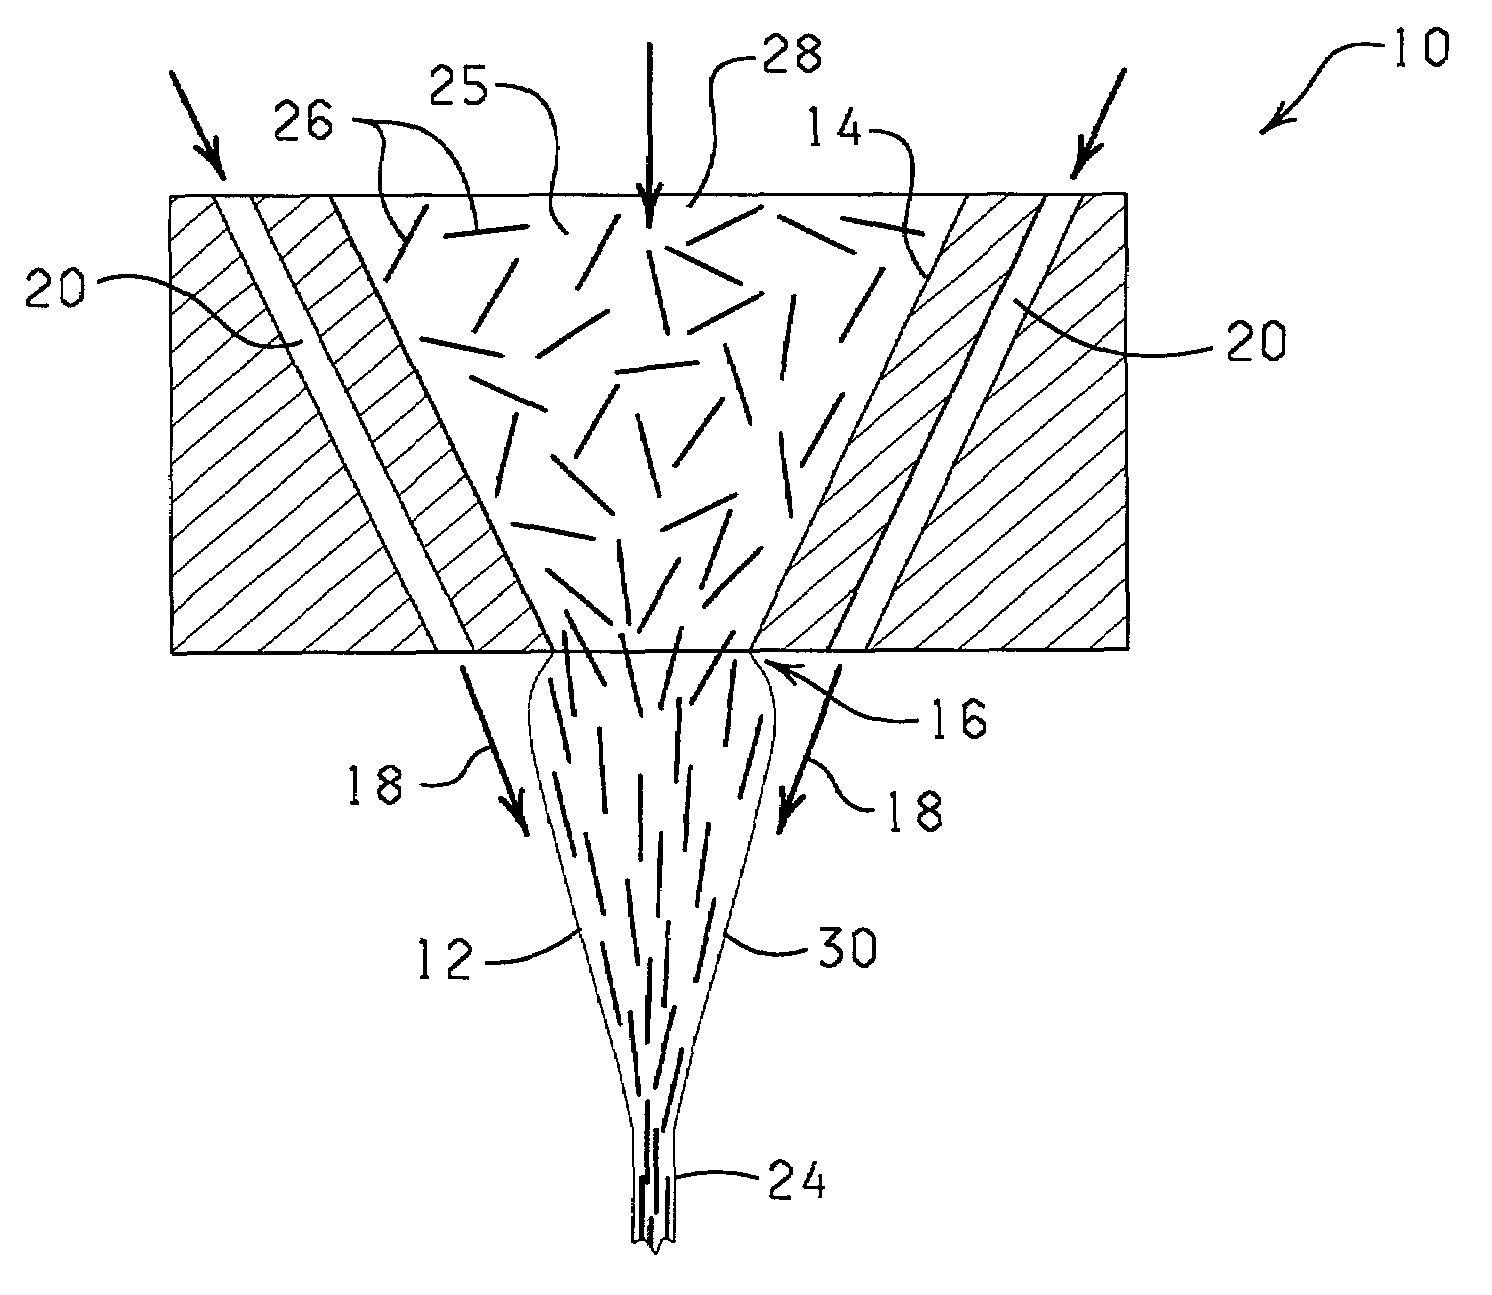 Method for forming a fibers/composite material having an anisotropic structure